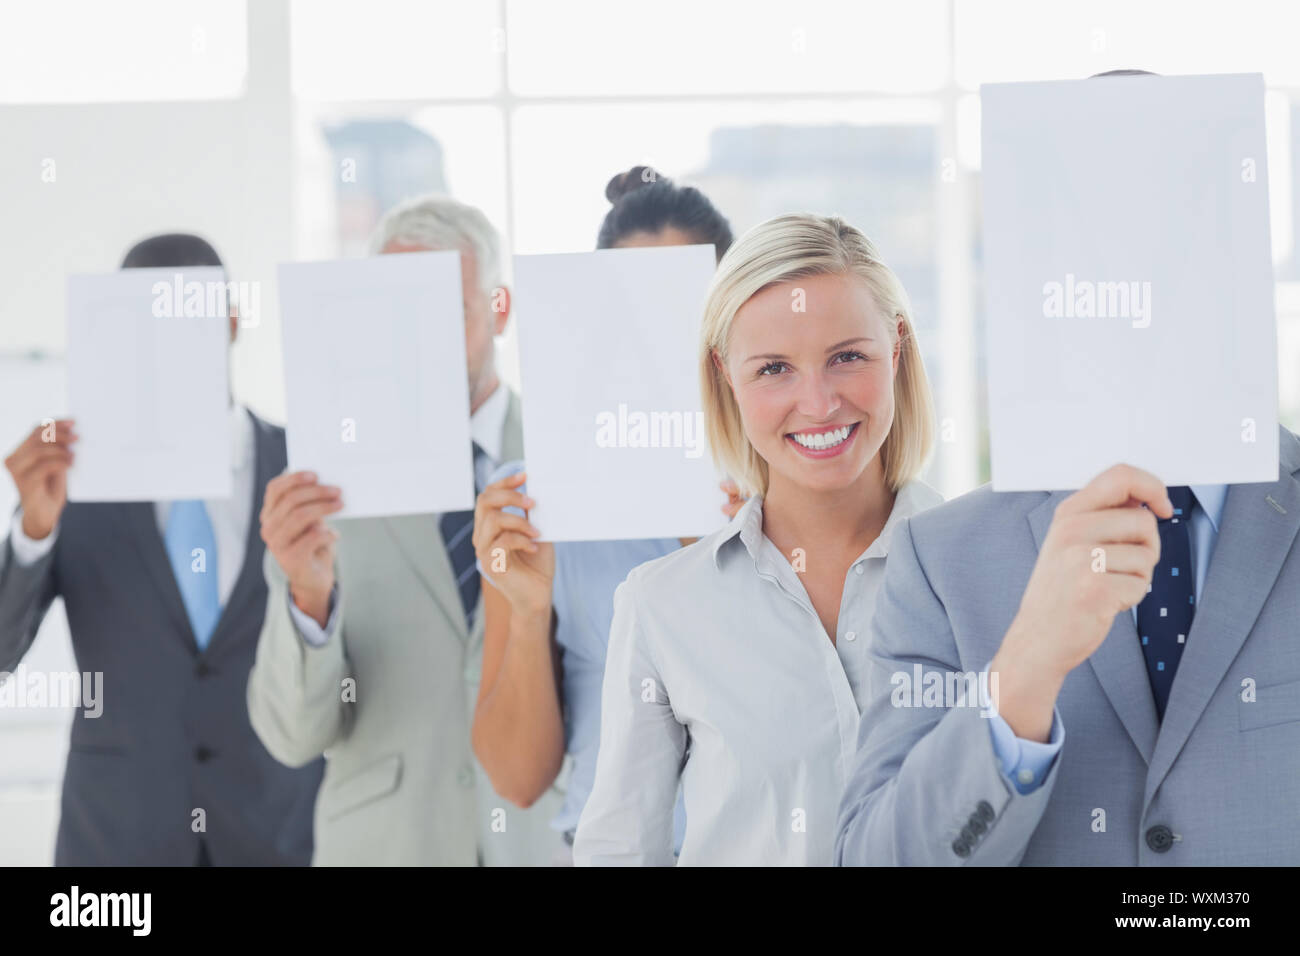 Business team covering face with white paper except for one woman smiling at camera Stock Photo